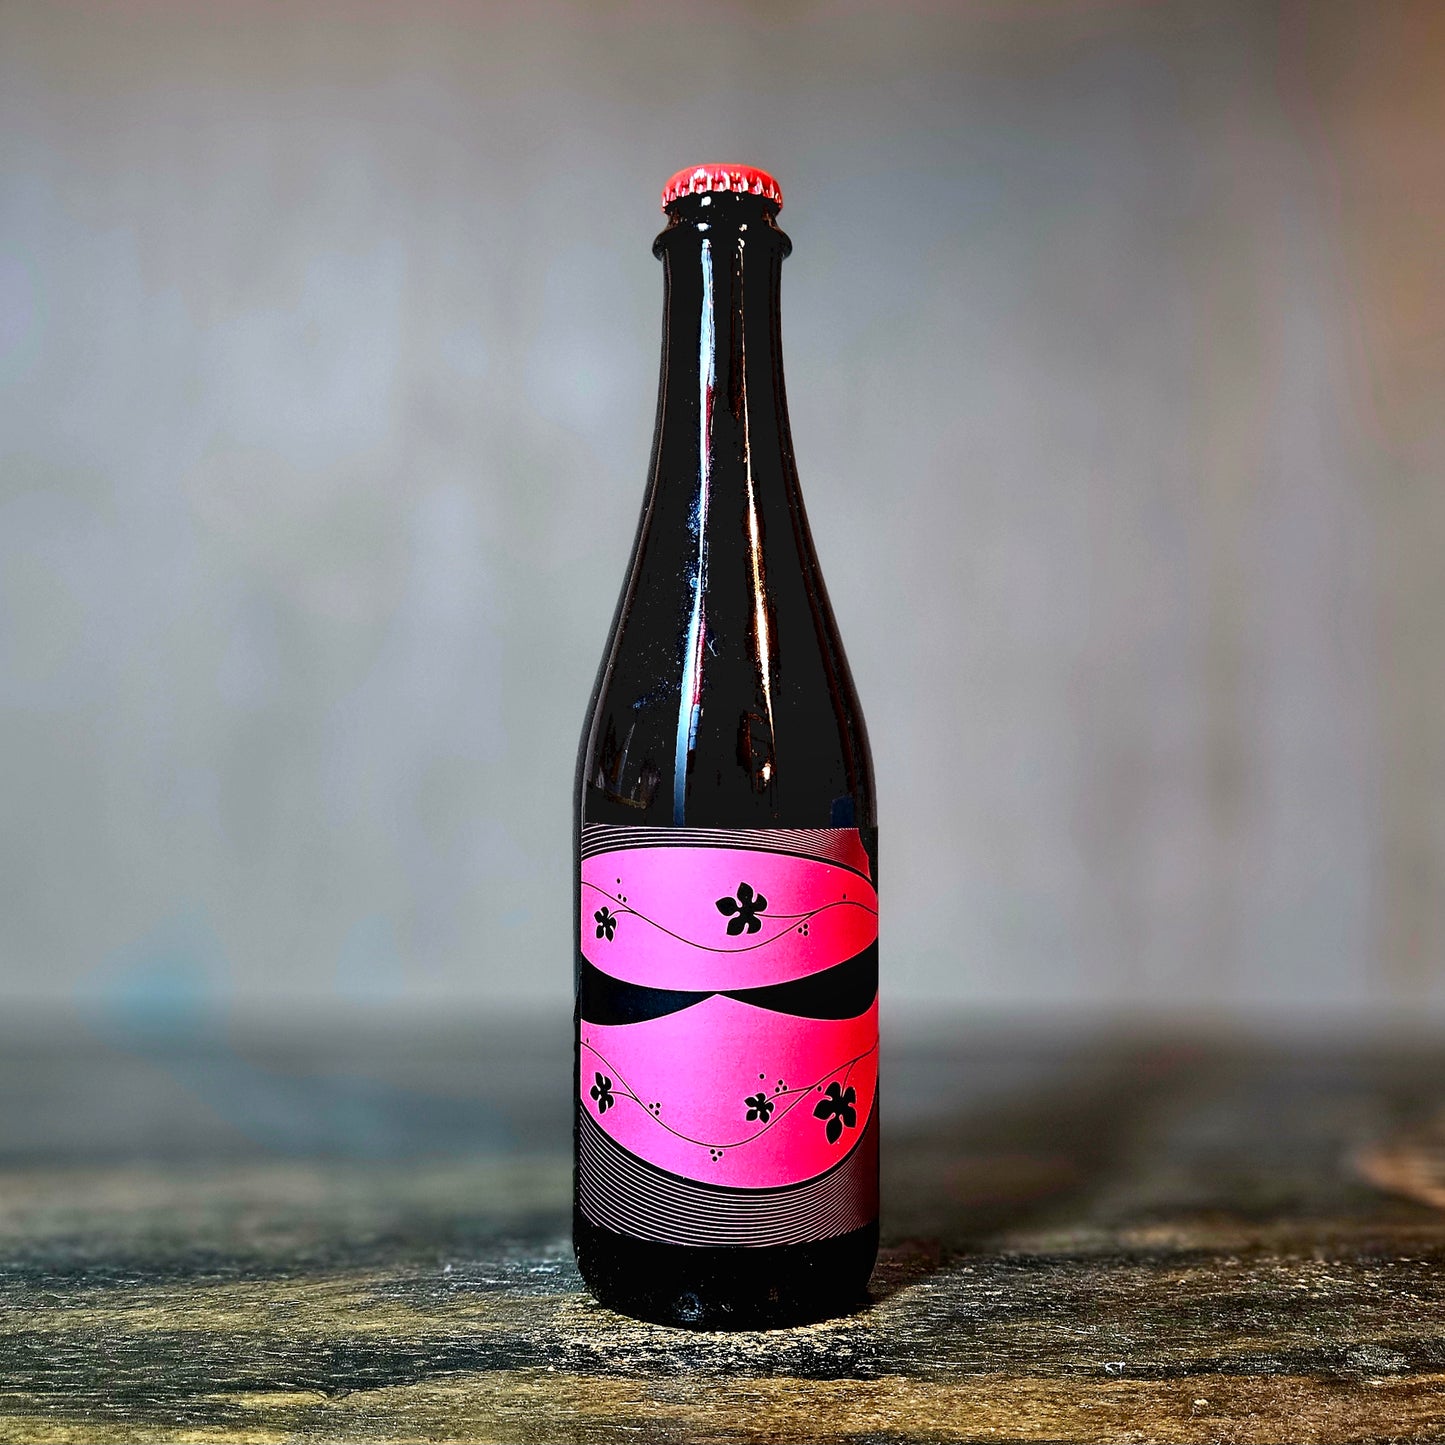 Indie Alehouse "Vine Song 7" Gamay Saison